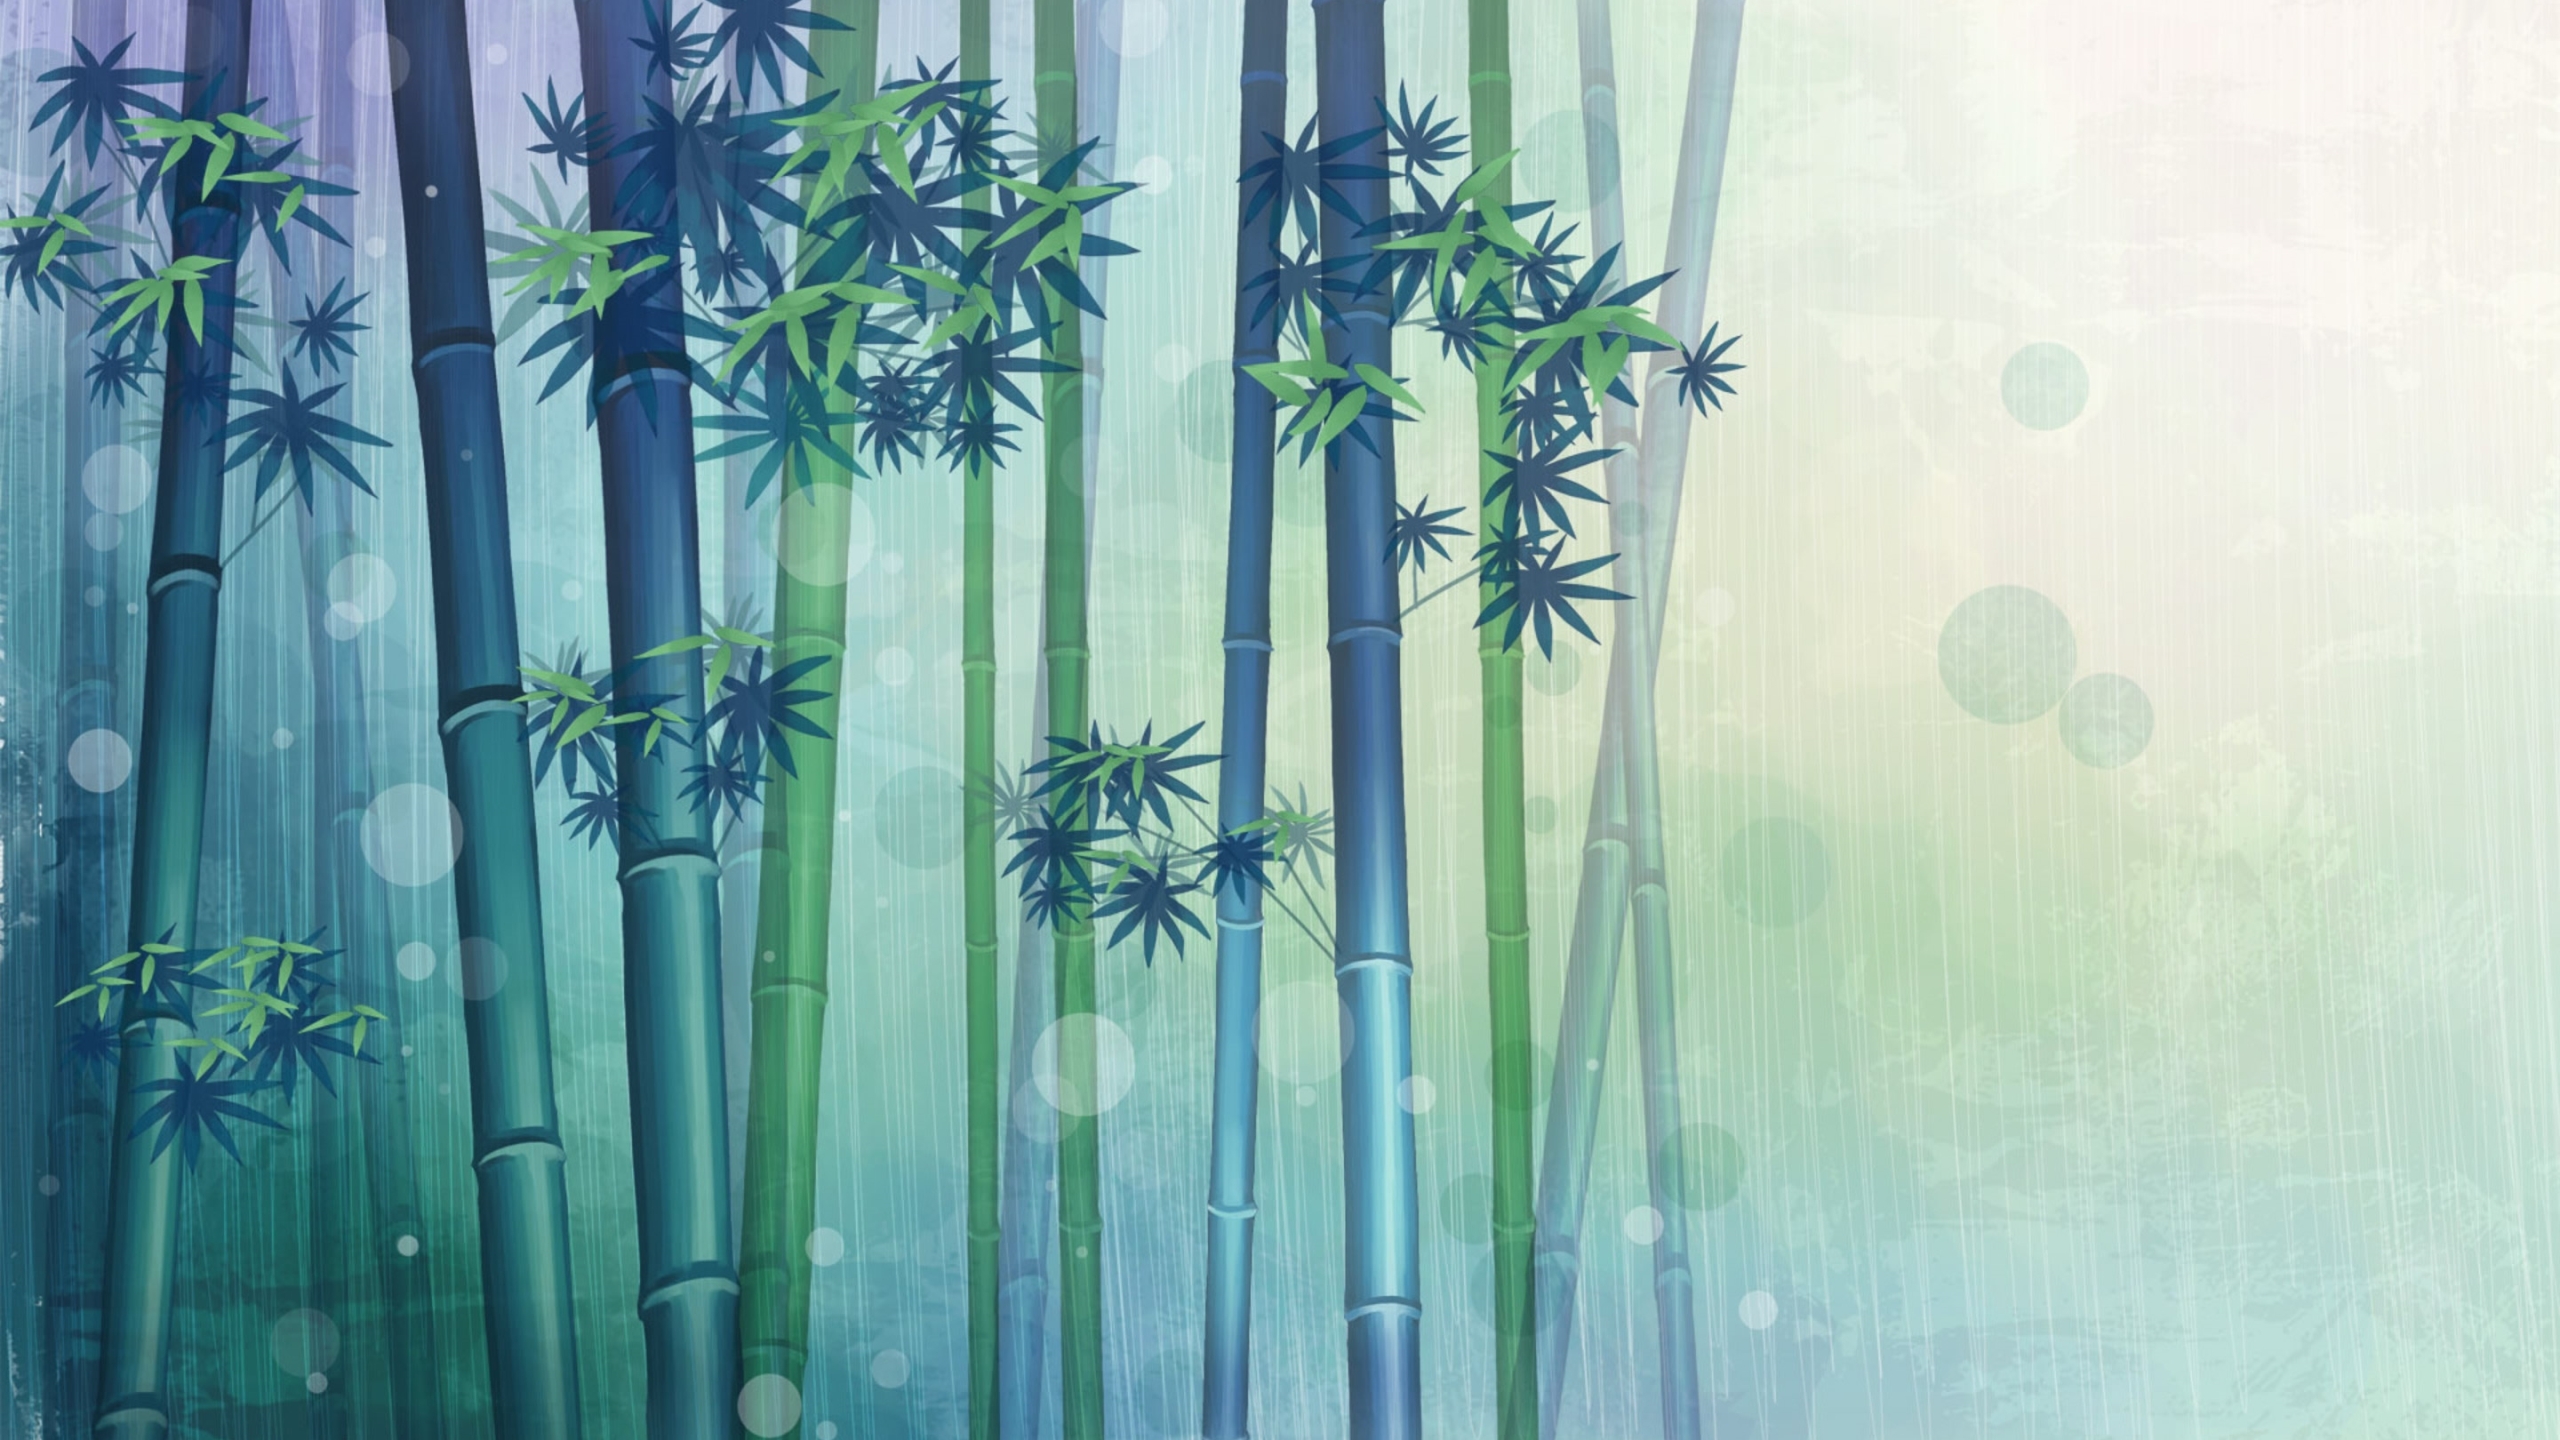 Bamboo Forest Imac Wallpaper HD Source